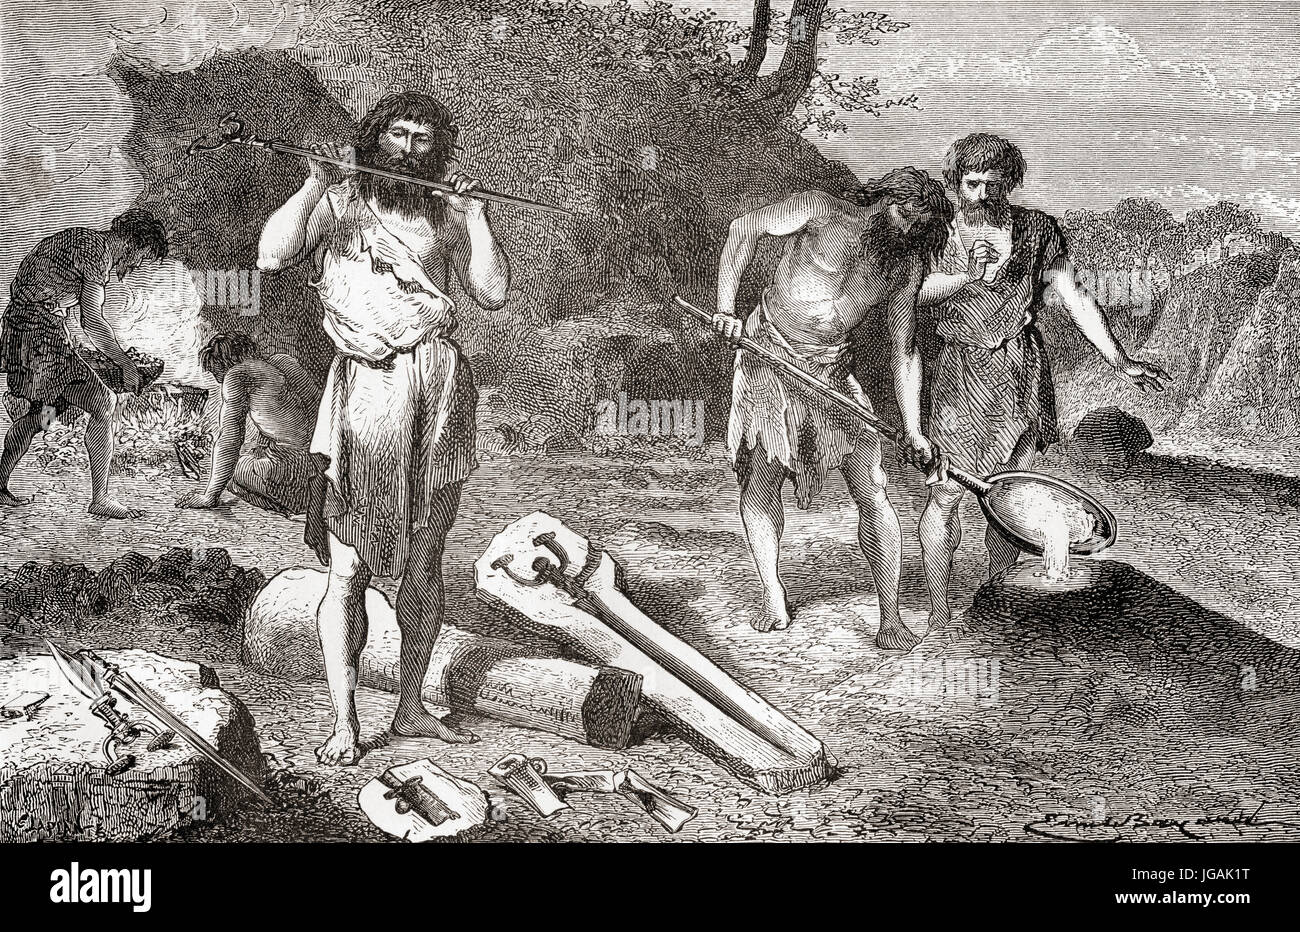 Men casting metal during the Bronze Age.  From L'Homme Primitif, published 1870. Stock Photo